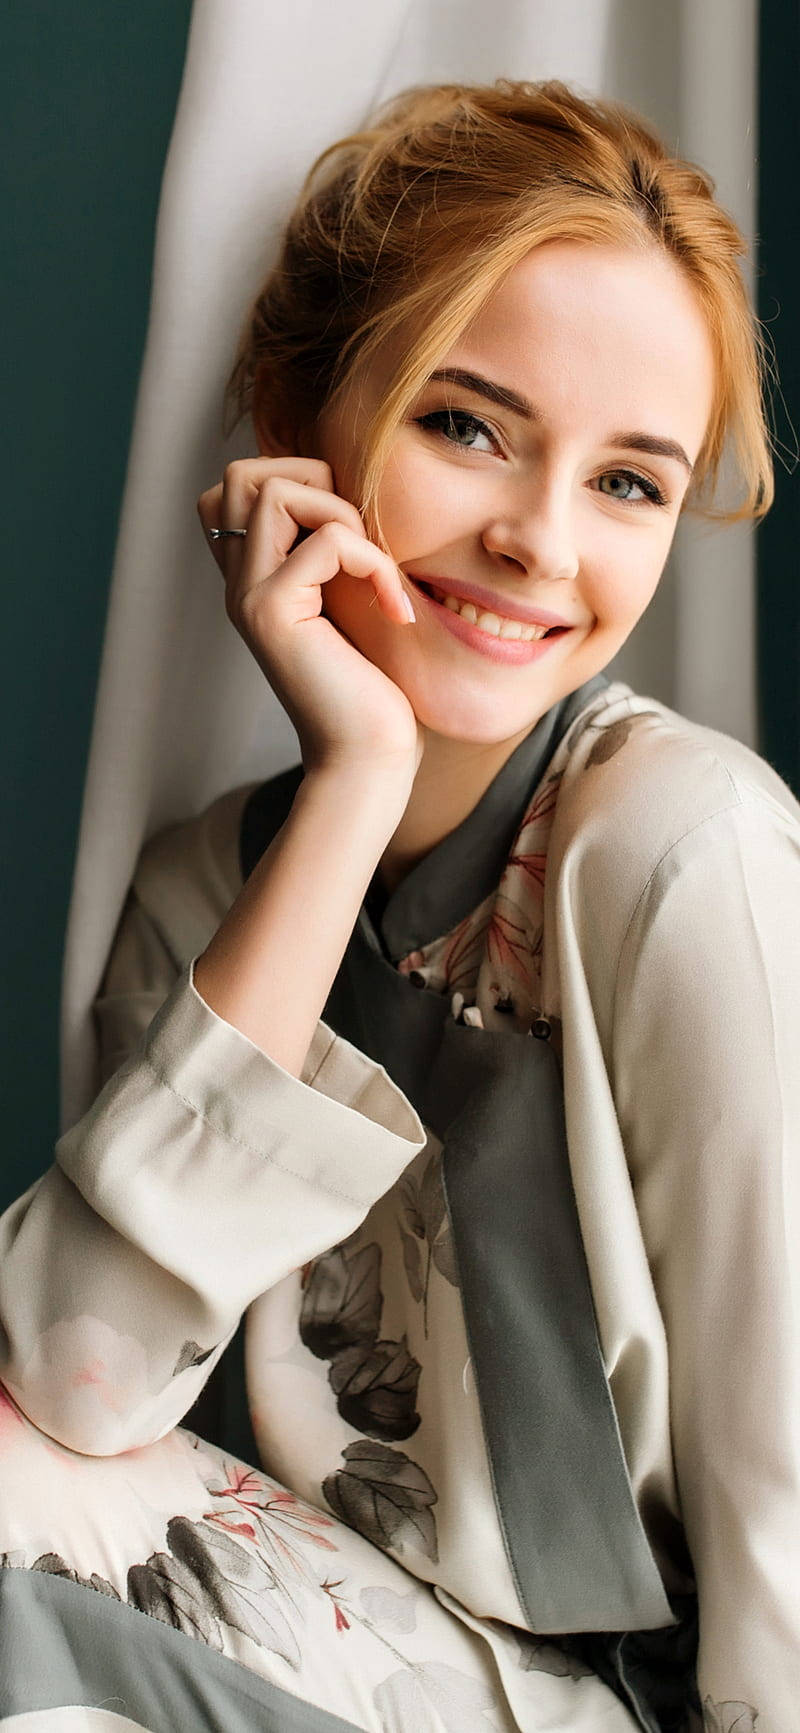 Lovely Girl With A Cute Smile Wallpaper